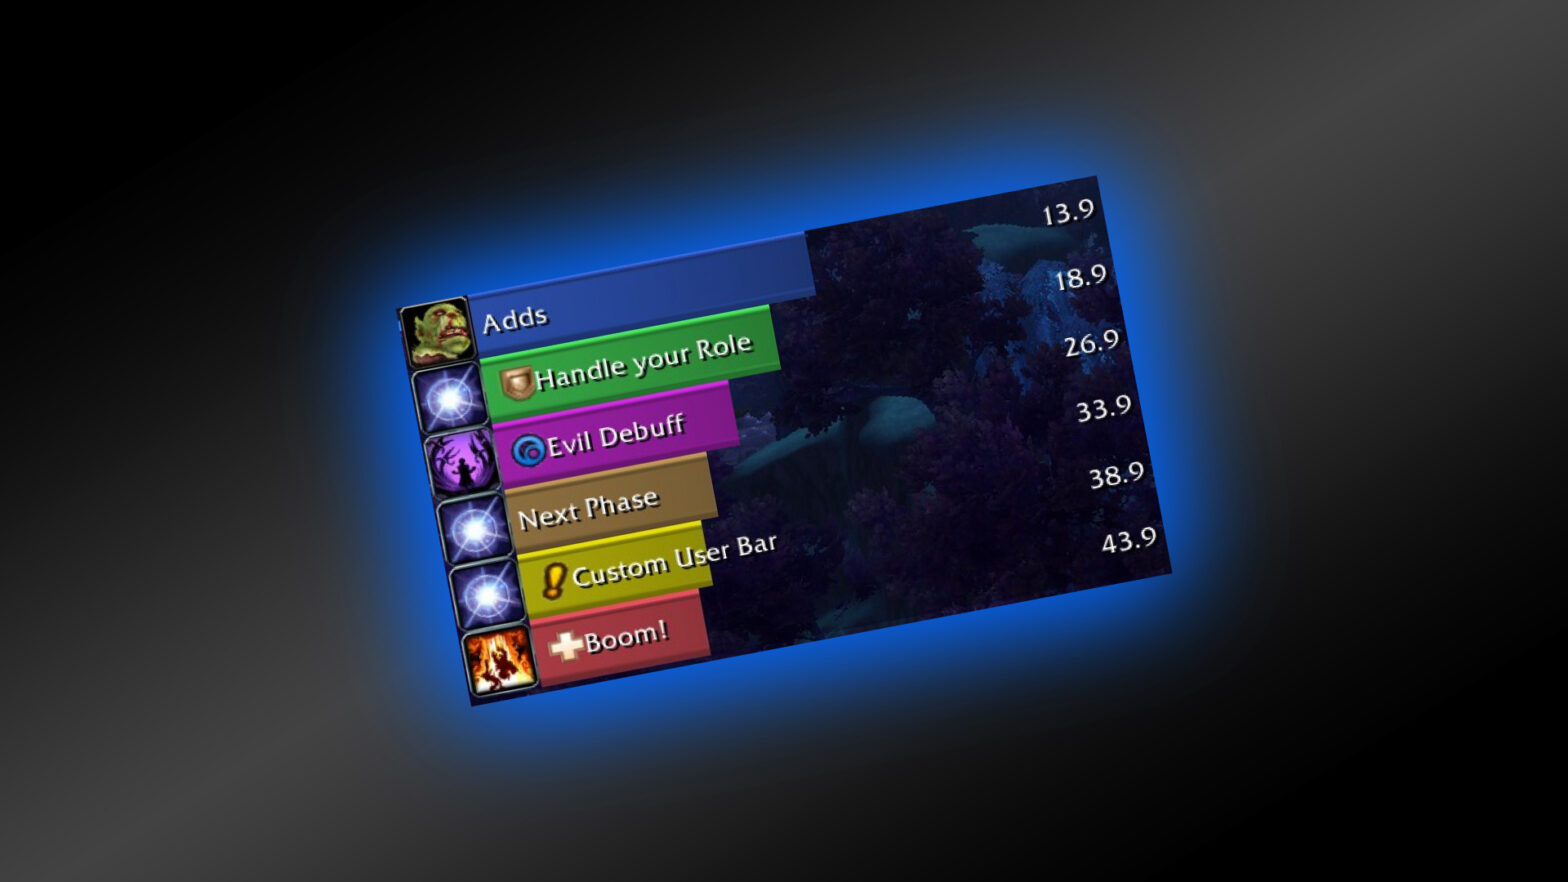 What Are The Most Popular Addons Used By Professional PvP Players On WoW?